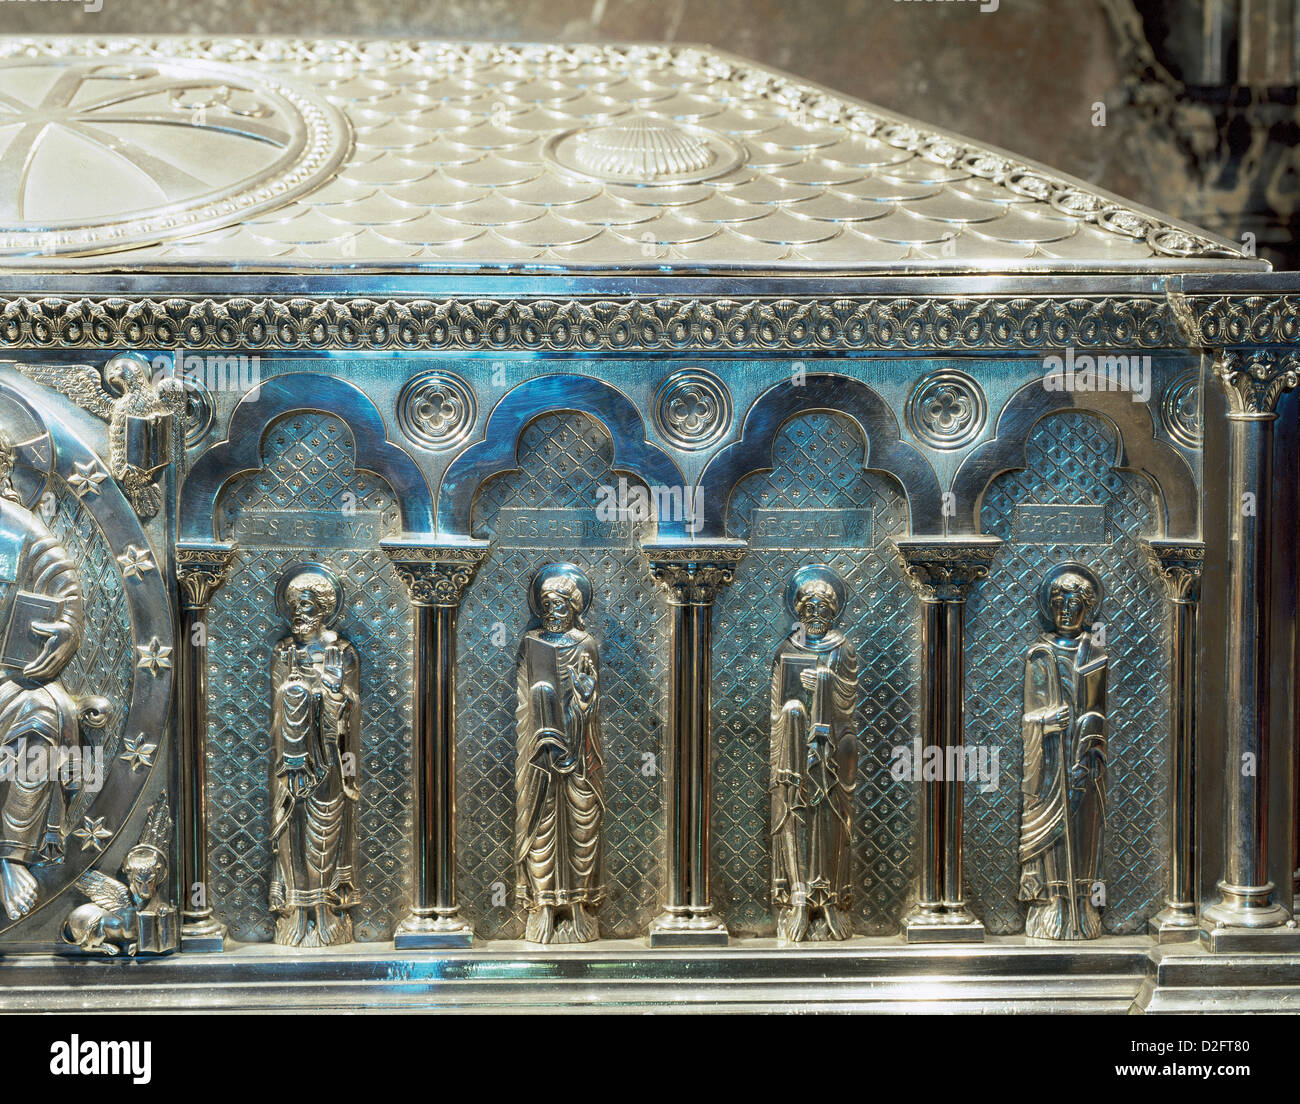 Spain. Galicia. Santiago de Compostela. Cathedral. The silver coffer holding the relic of St. James. Evangelists. Stock Photo